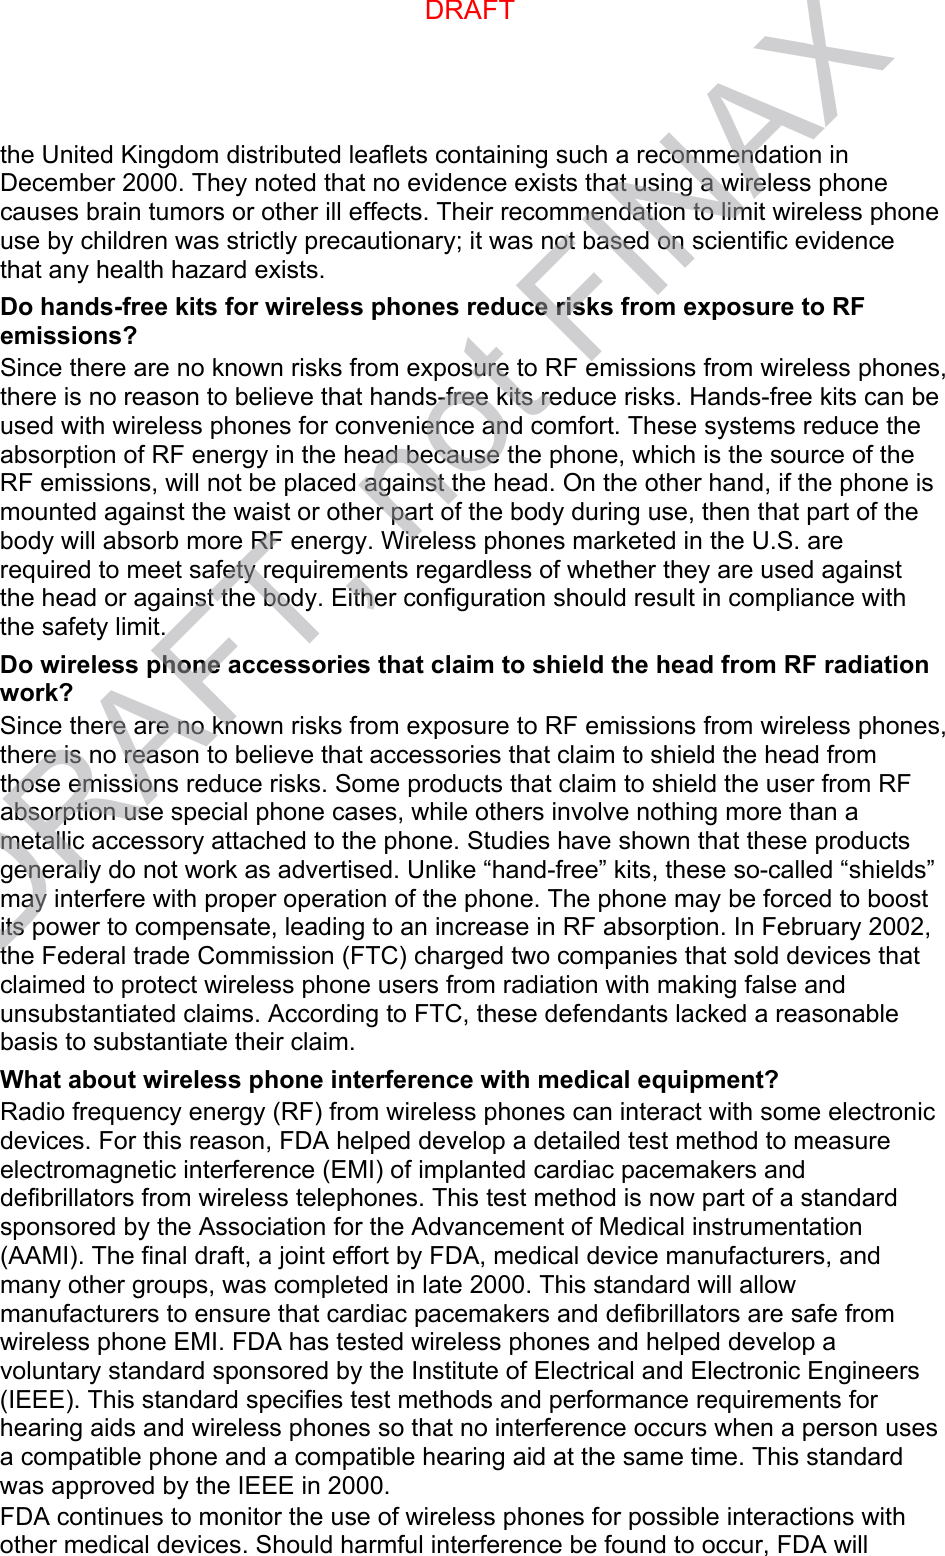 the United Kingdom distributed leaflets containing such a recommendation in December 2000. They noted that no evidence exists that using a wireless phone causes brain tumors or other ill effects. Their recommendation to limit wireless phone use by children was strictly precautionary; it was not based on scientific evidence that any health hazard exists.   Do hands-free kits for wireless phones reduce risks from exposure to RF emissions? Since there are no known risks from exposure to RF emissions from wireless phones, there is no reason to believe that hands-free kits reduce risks. Hands-free kits can be used with wireless phones for convenience and comfort. These systems reduce the absorption of RF energy in the head because the phone, which is the source of the RF emissions, will not be placed against the head. On the other hand, if the phone is mounted against the waist or other part of the body during use, then that part of the body will absorb more RF energy. Wireless phones marketed in the U.S. are required to meet safety requirements regardless of whether they are used against the head or against the body. Either configuration should result in compliance with the safety limit. Do wireless phone accessories that claim to shield the head from RF radiation work? Since there are no known risks from exposure to RF emissions from wireless phones, there is no reason to believe that accessories that claim to shield the head from those emissions reduce risks. Some products that claim to shield the user from RF absorption use special phone cases, while others involve nothing more than a metallic accessory attached to the phone. Studies have shown that these products generally do not work as advertised. Unlike “hand-free” kits, these so-called “shields” may interfere with proper operation of the phone. The phone may be forced to boost its power to compensate, leading to an increase in RF absorption. In February 2002, the Federal trade Commission (FTC) charged two companies that sold devices that claimed to protect wireless phone users from radiation with making false and unsubstantiated claims. According to FTC, these defendants lacked a reasonable basis to substantiate their claim. What about wireless phone interference with medical equipment? Radio frequency energy (RF) from wireless phones can interact with some electronic devices. For this reason, FDA helped develop a detailed test method to measure electromagnetic interference (EMI) of implanted cardiac pacemakers and defibrillators from wireless telephones. This test method is now part of a standard sponsored by the Association for the Advancement of Medical instrumentation (AAMI). The final draft, a joint effort by FDA, medical device manufacturers, and many other groups, was completed in late 2000. This standard will allow manufacturers to ensure that cardiac pacemakers and defibrillators are safe from wireless phone EMI. FDA has tested wireless phones and helped develop a voluntary standard sponsored by the Institute of Electrical and Electronic Engineers (IEEE). This standard specifies test methods and performance requirements for hearing aids and wireless phones so that no interference occurs when a person uses a compatible phone and a compatible hearing aid at the same time. This standard was approved by the IEEE in 2000. FDA continues to monitor the use of wireless phones for possible interactions with other medical devices. Should harmful interference be found to occur, FDA will DRAFTDRAFT, not FINAX